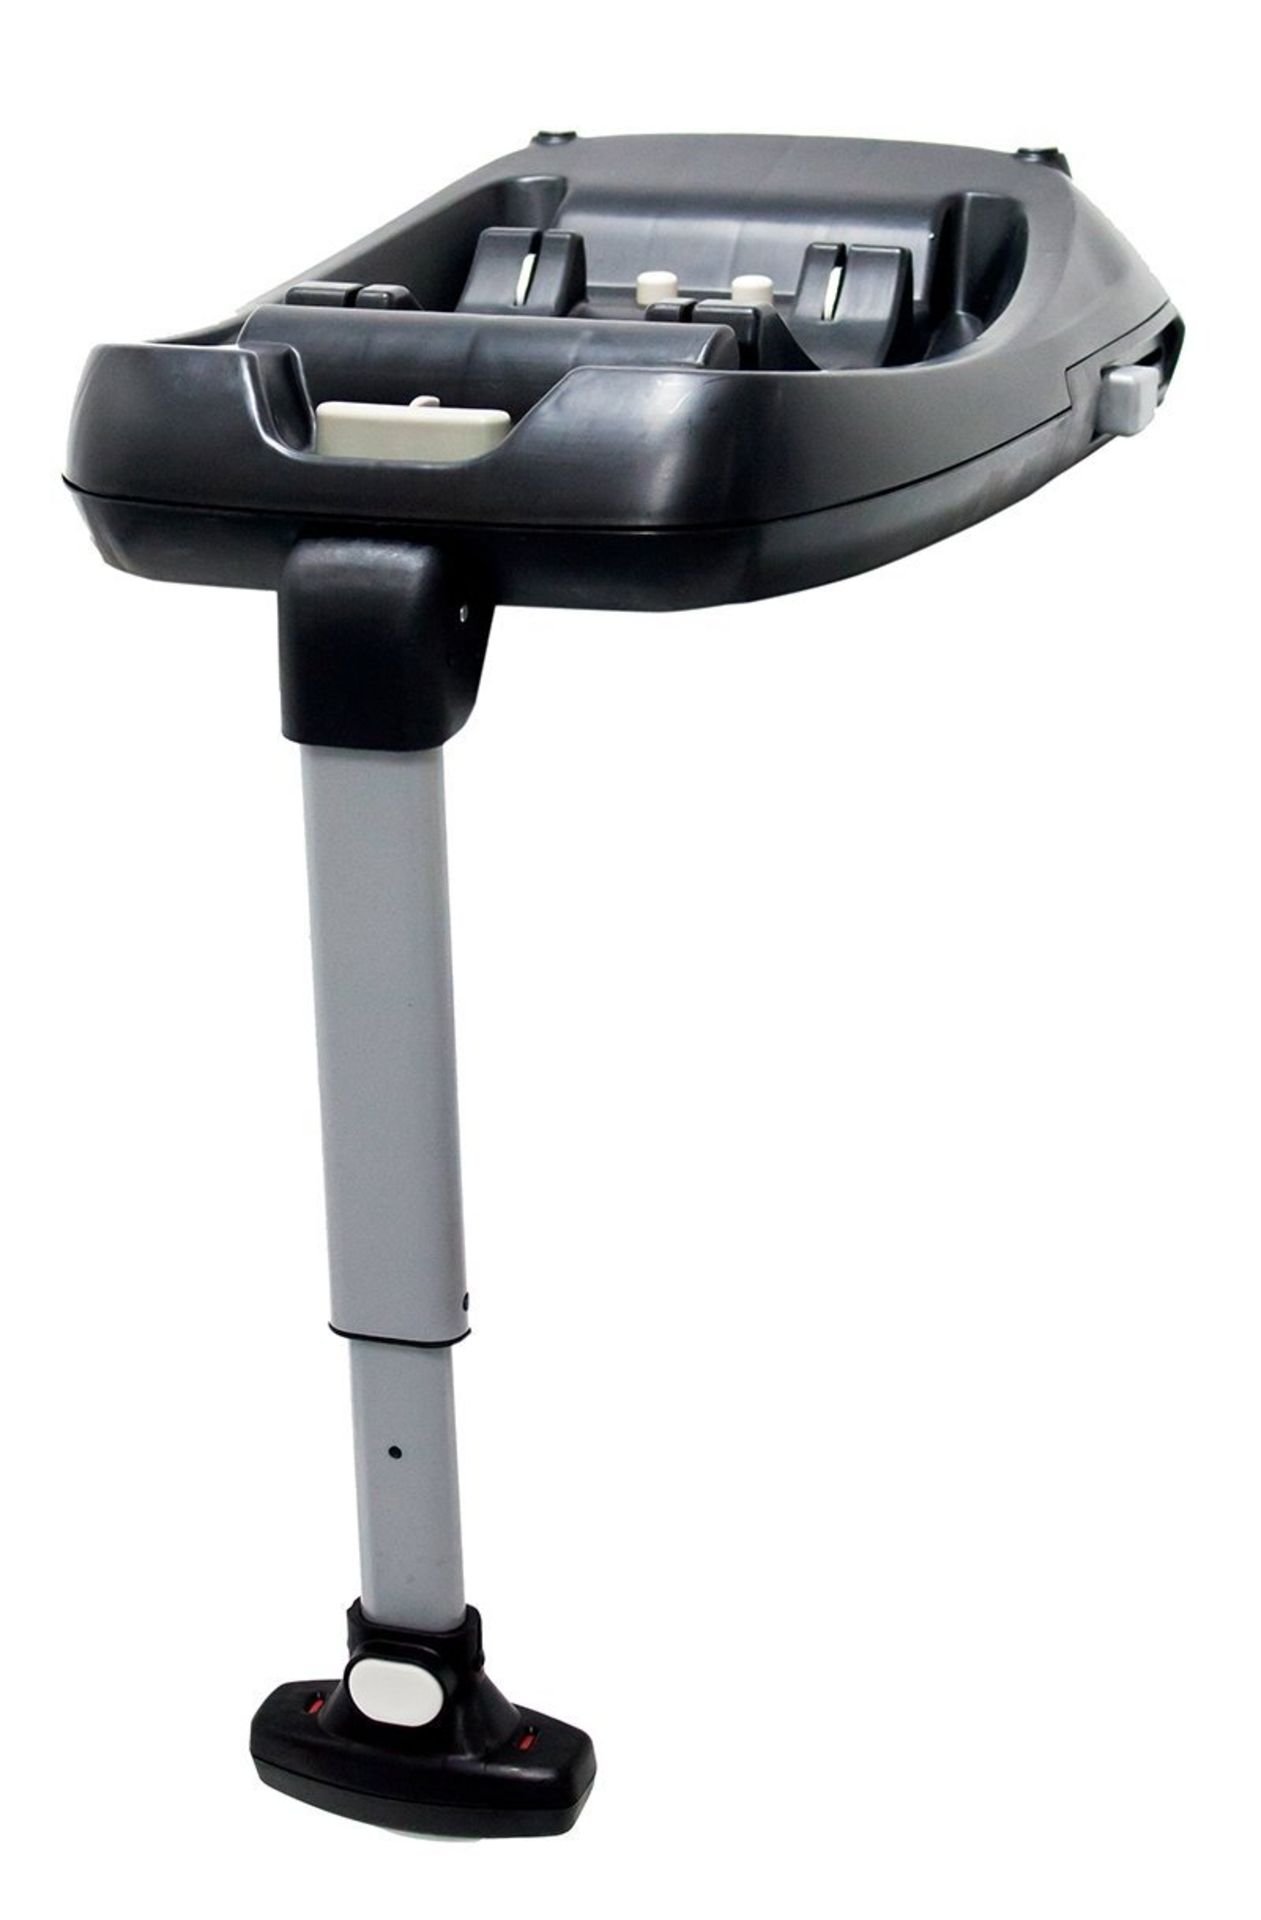 BRAND NEW Cosatto Hold Isofix Car Seat Base RRP £119.99